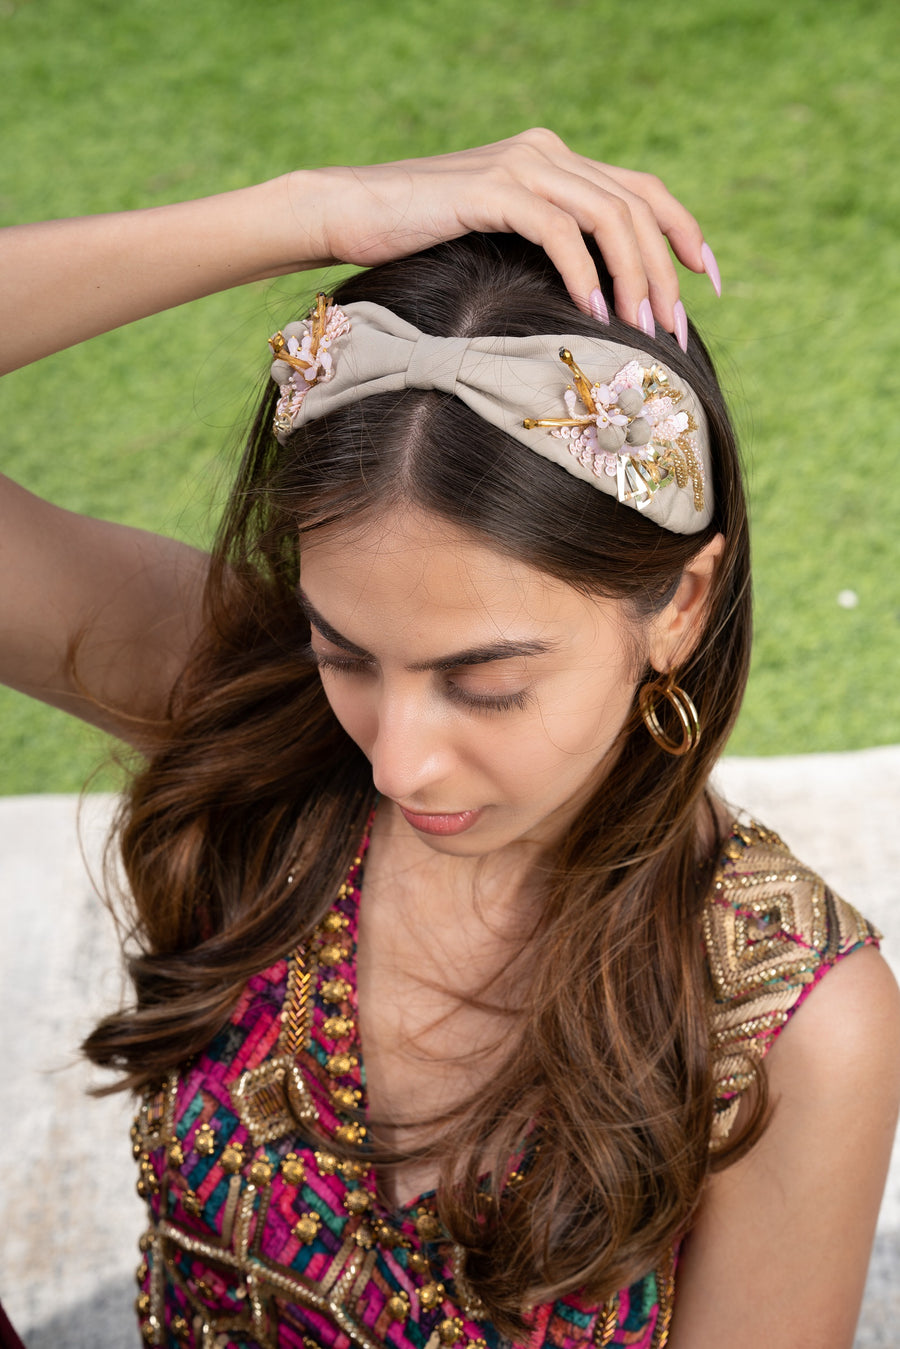 Beige Headband With Gold And Pink Embellishments